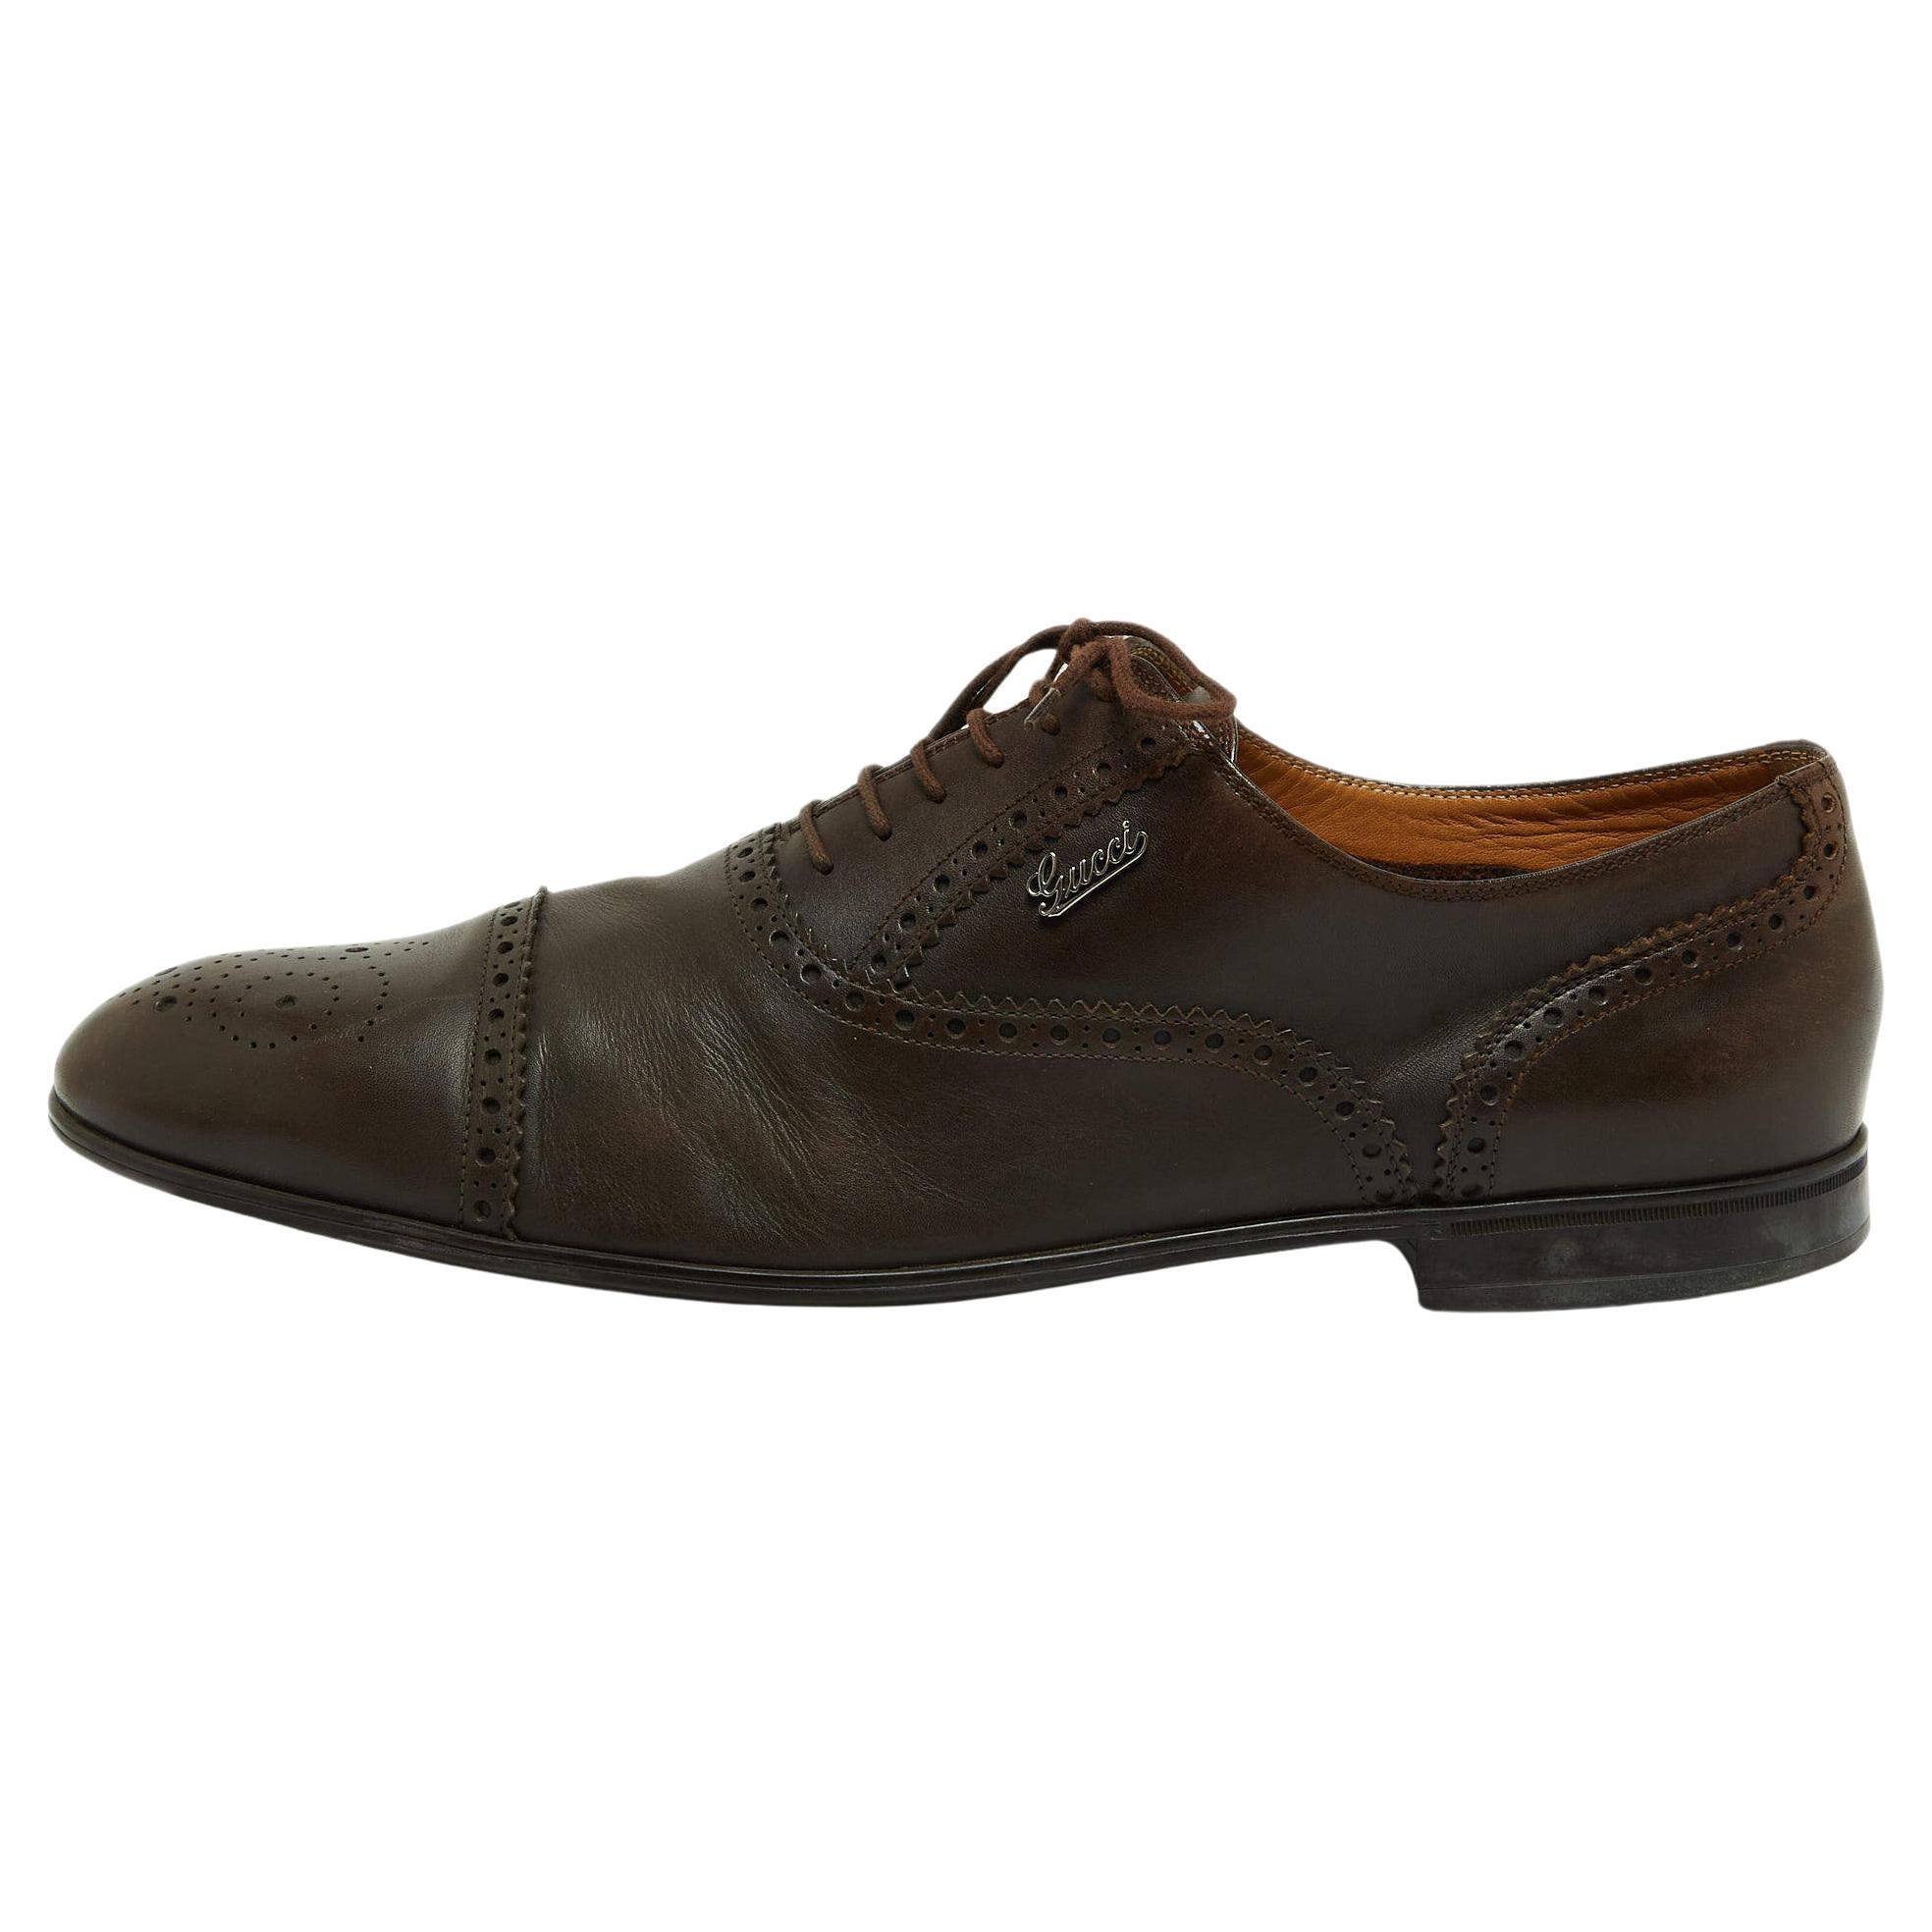 Gucci Brown Leather Brogue Oxfords Size 45.5 For Sale